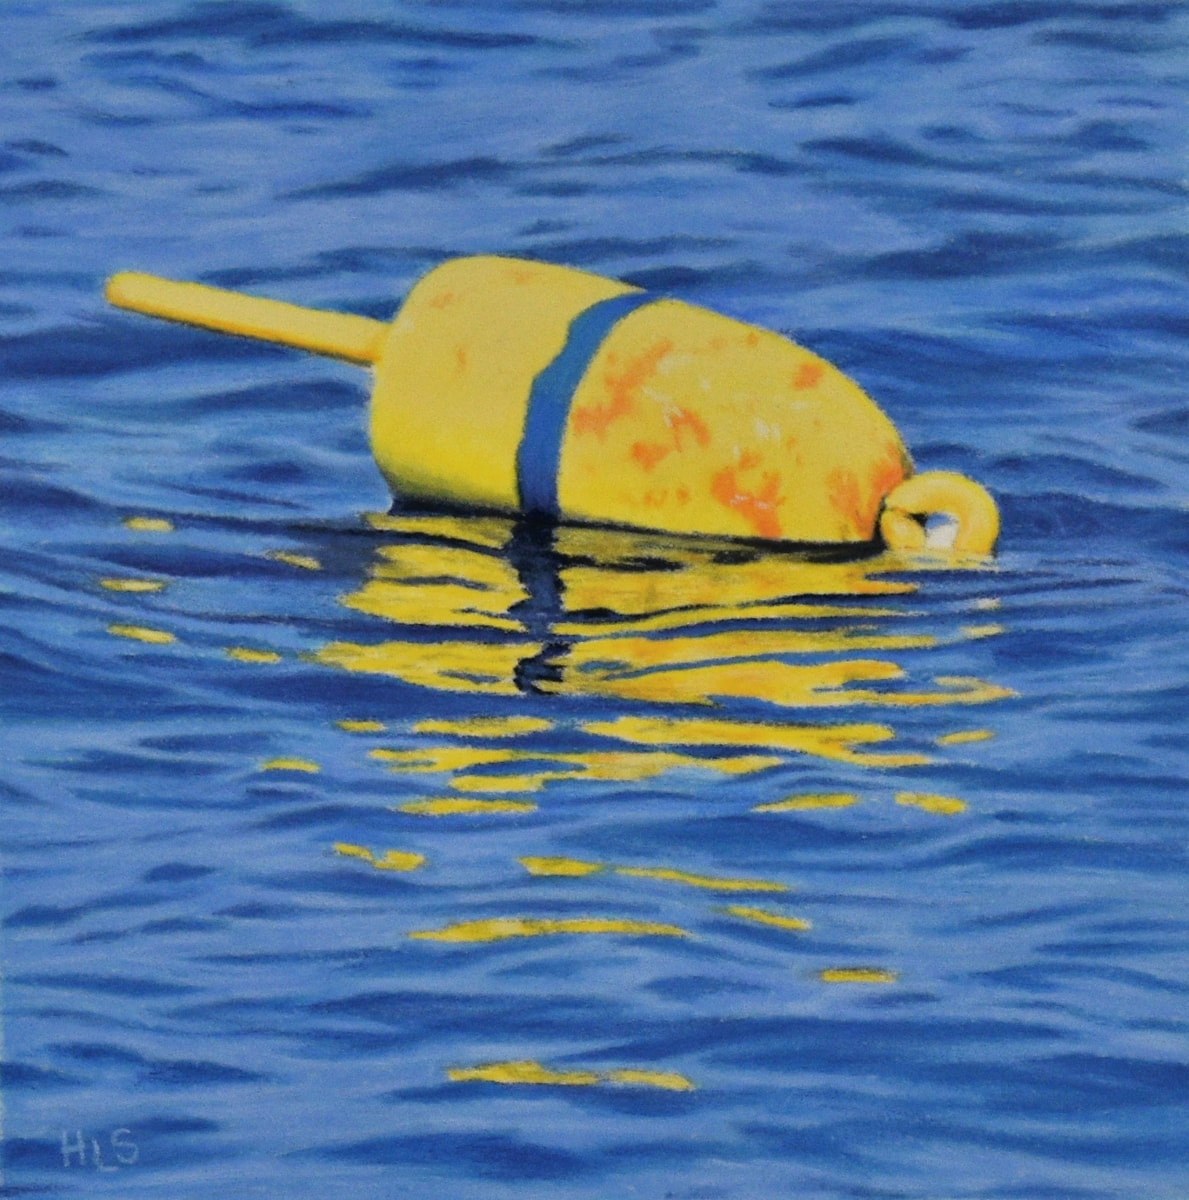 Lobster Buoy #3 - Print Only - Limited Edition of 50 - Signed and Numbered